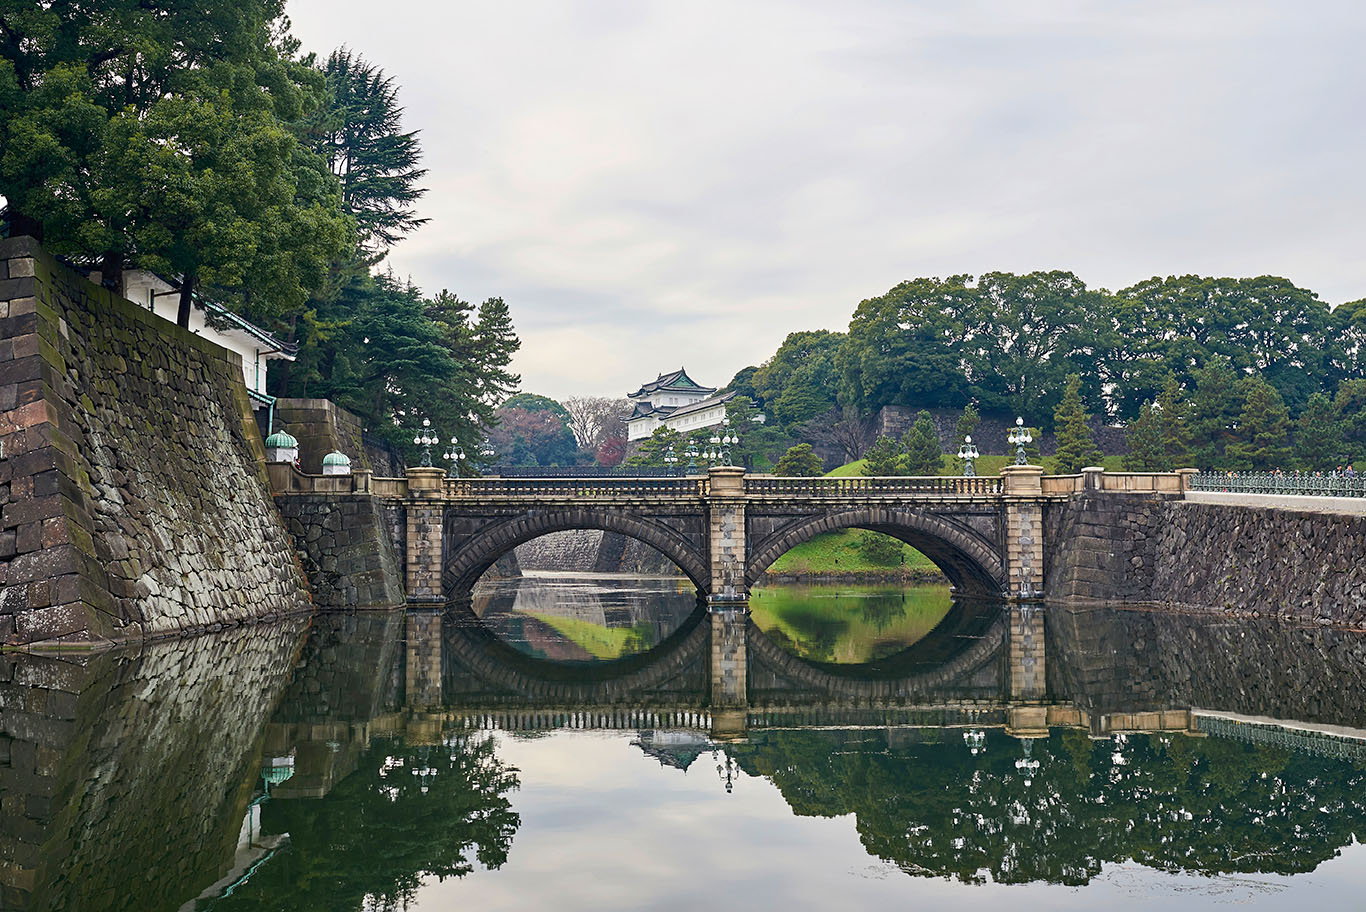 bridge over still water with Japanese-style buildings in distance